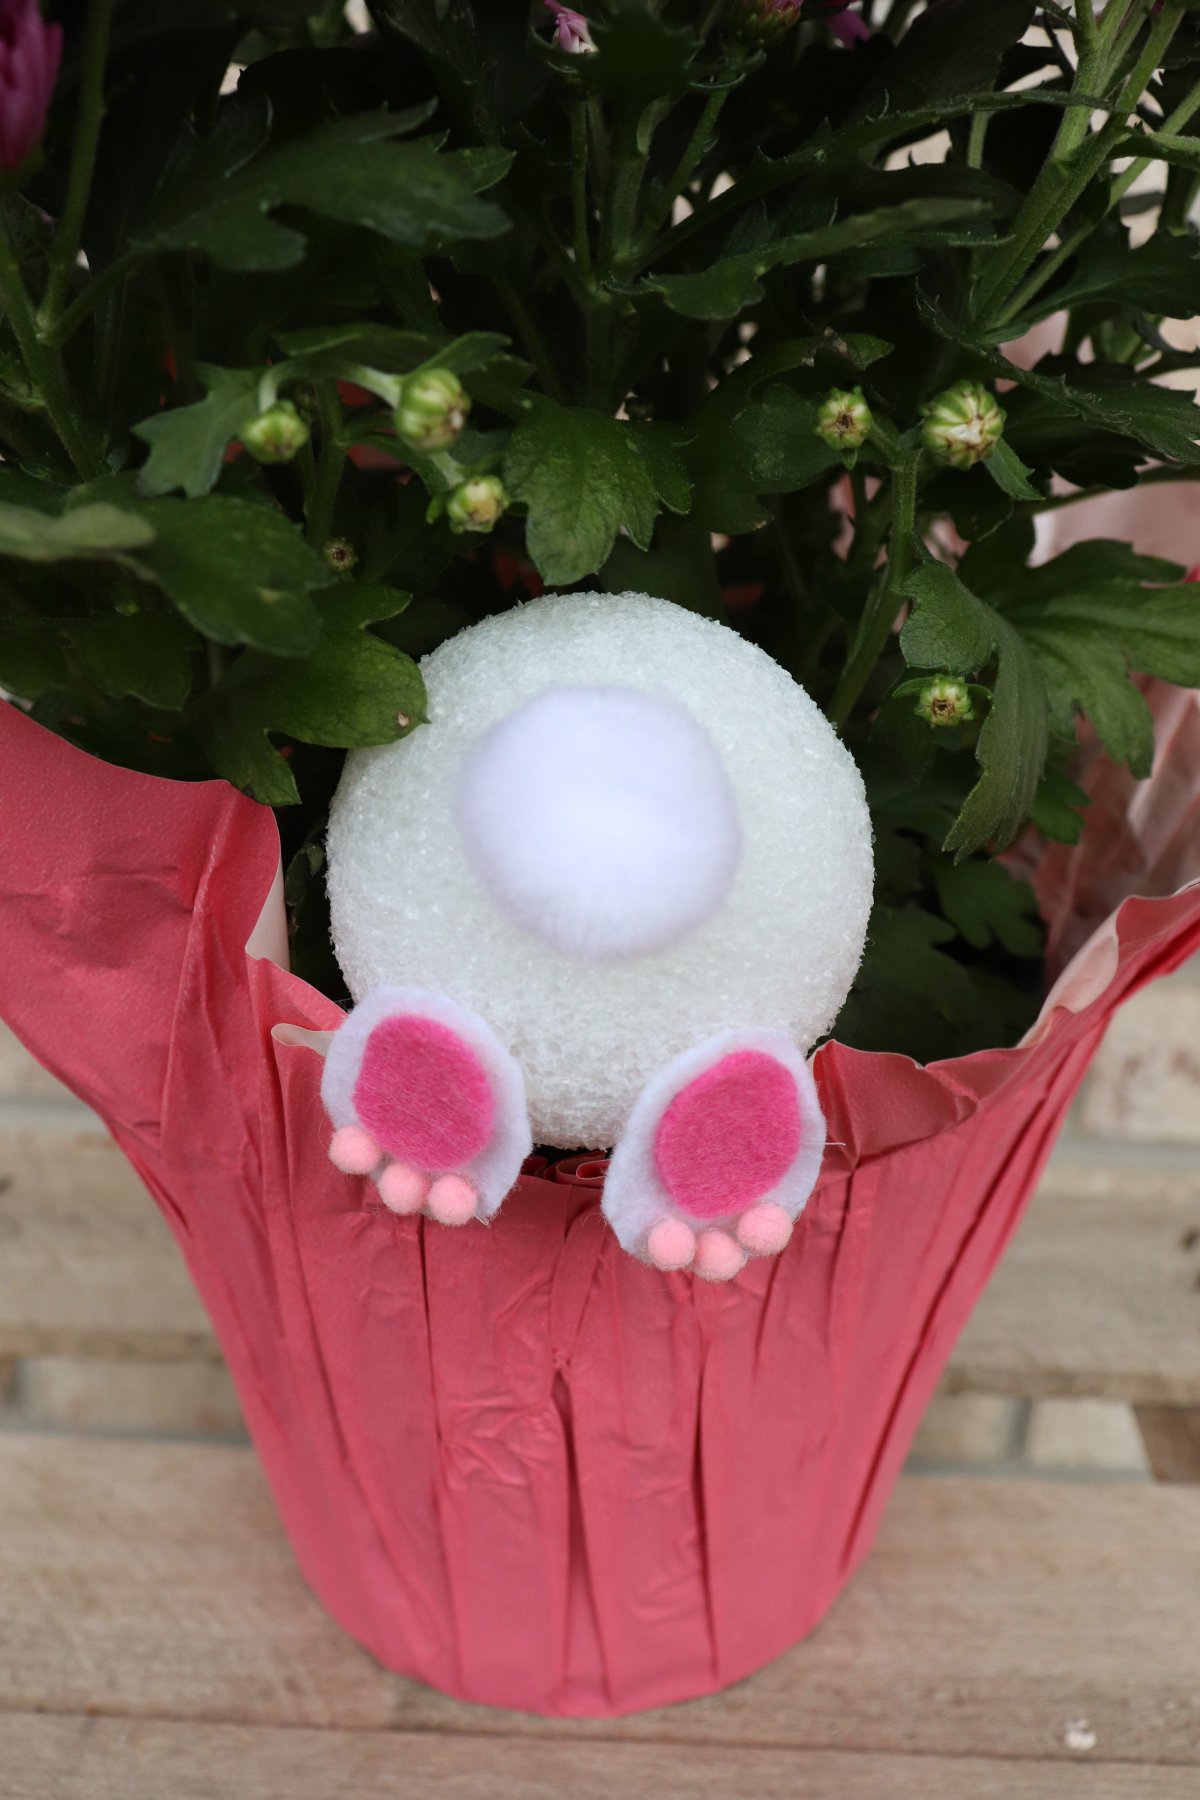 Image contains a potted purple mum plant with a "bunny bottom" made of a styrofoam ball, pom pom, and felt feet sticking out of the pot.